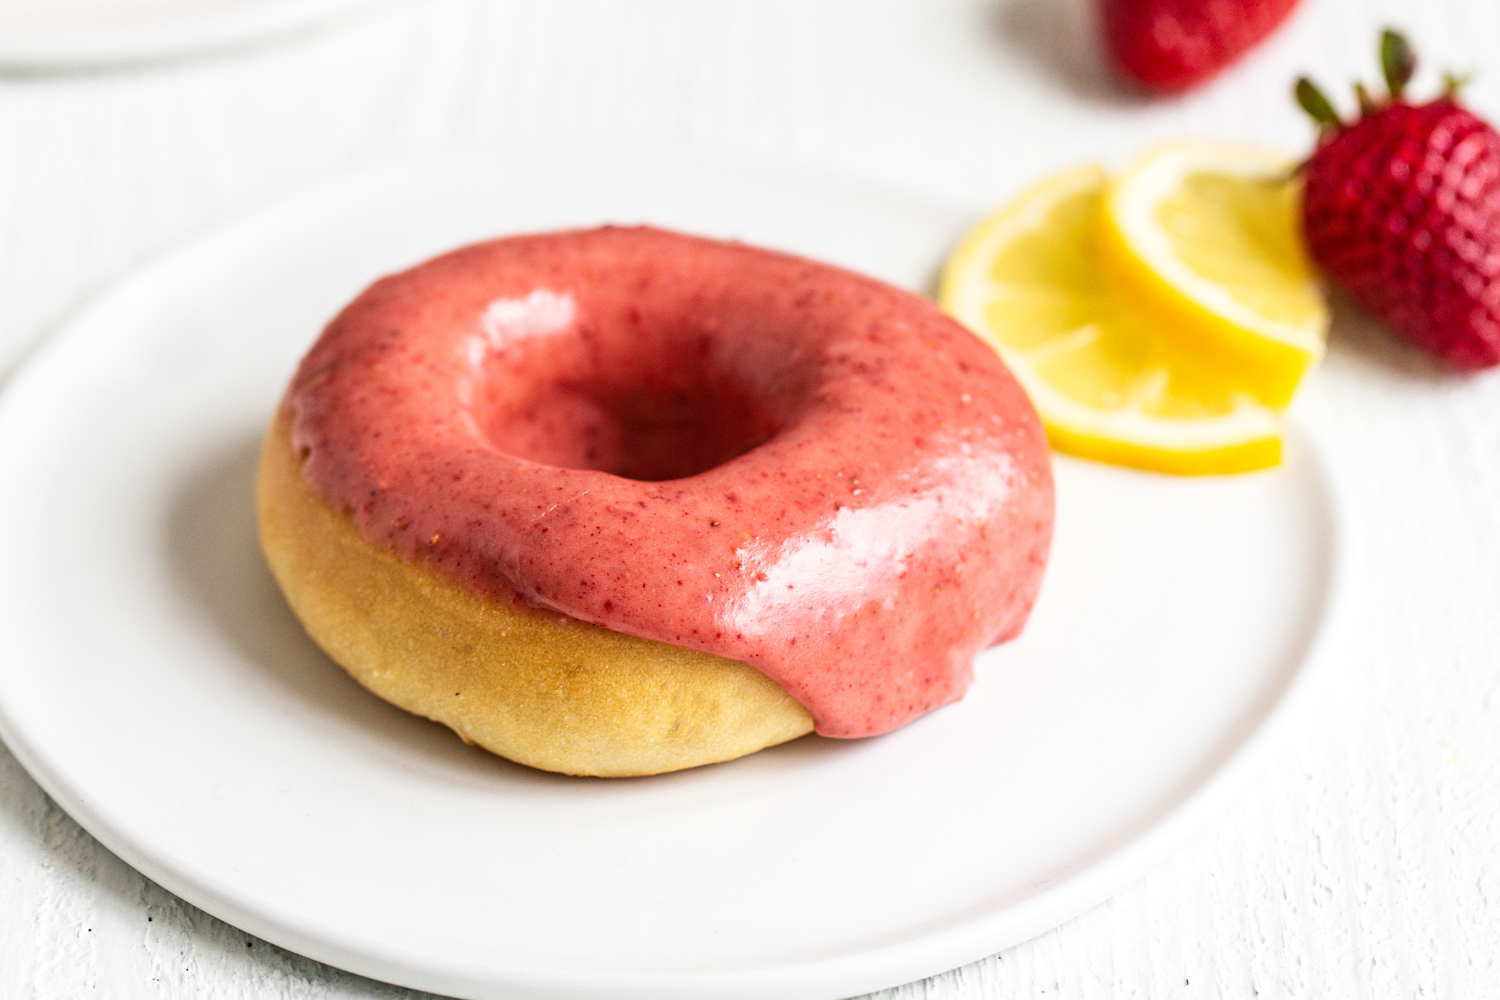 one Baked Strawberry Lemon Doughnut on a white plate with slices of lemon behind.